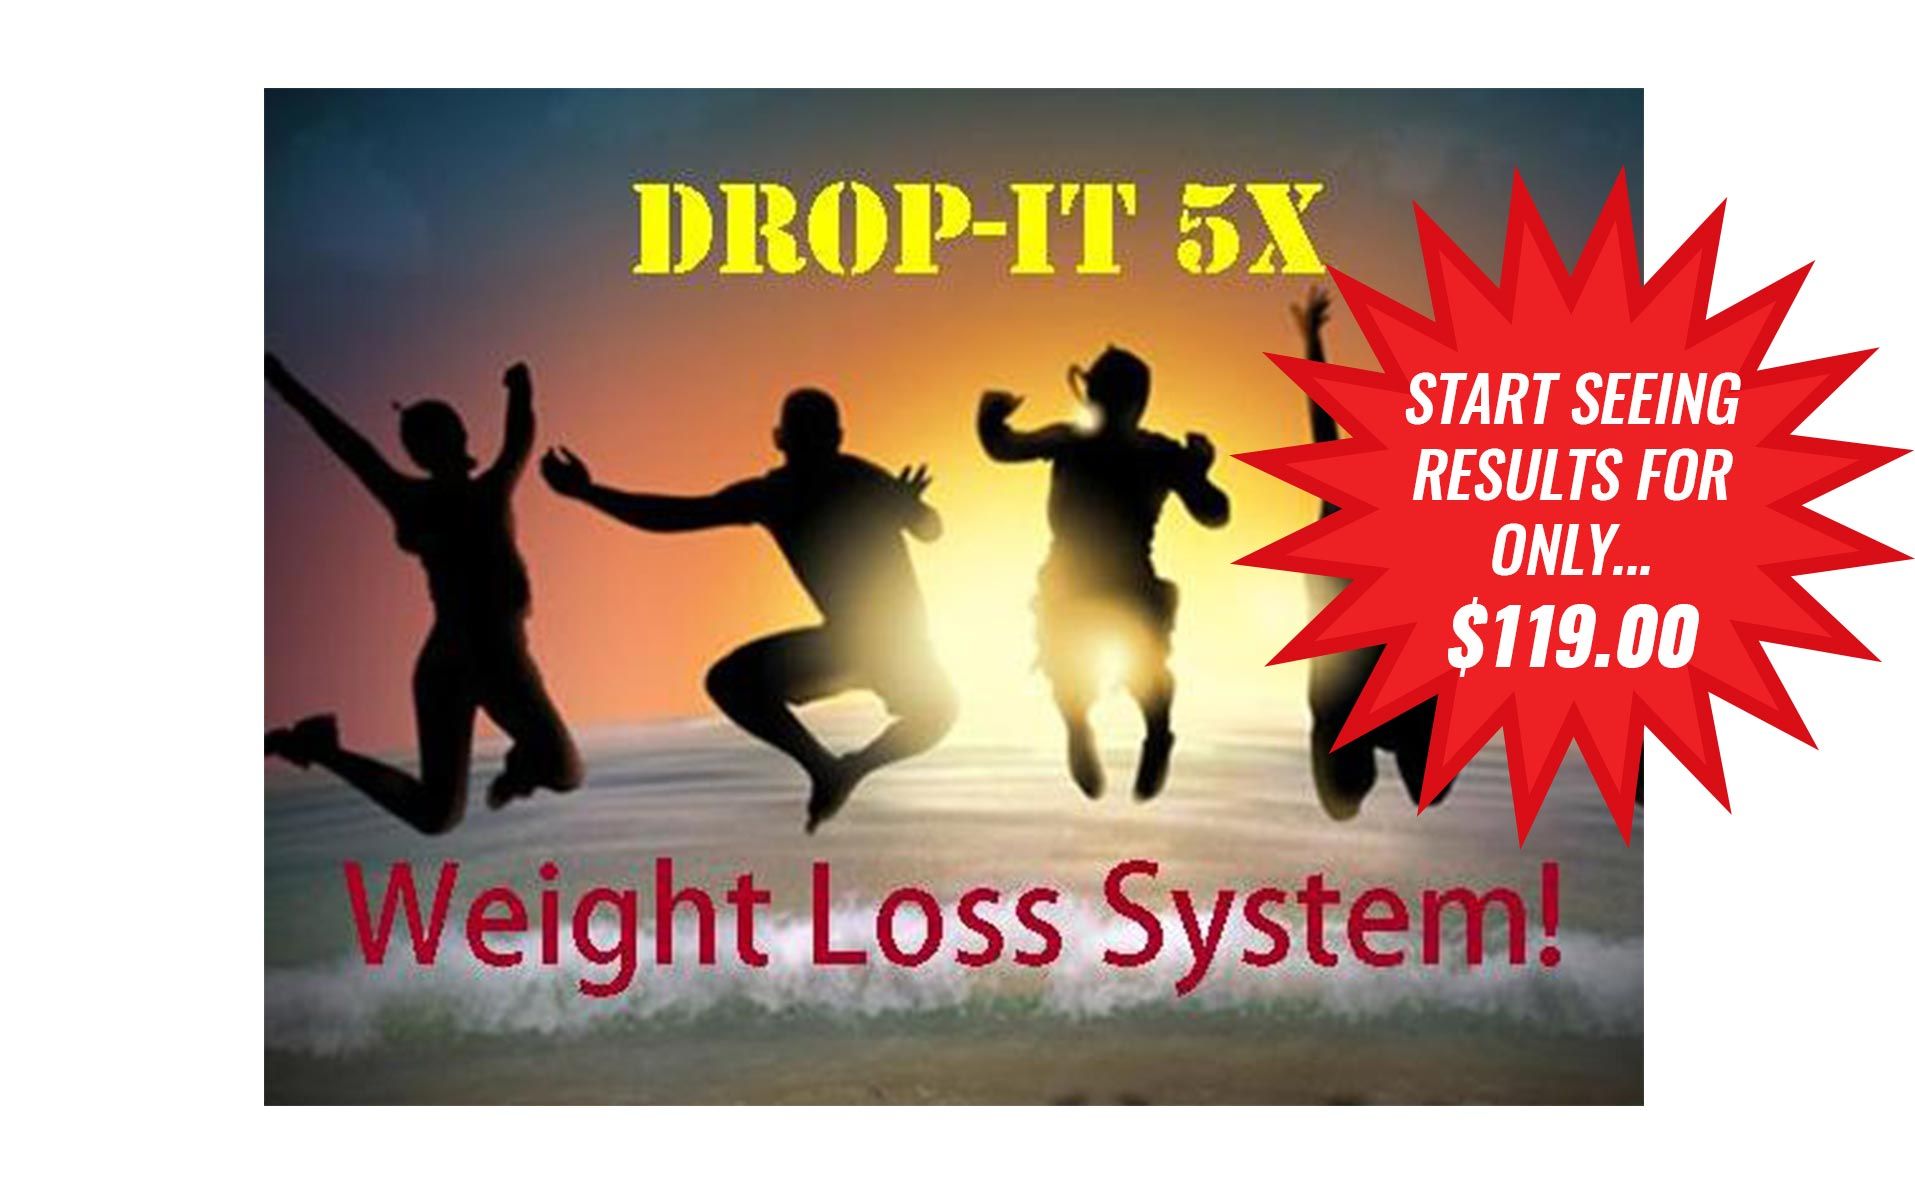 Nutrition-Based Weight Loss System